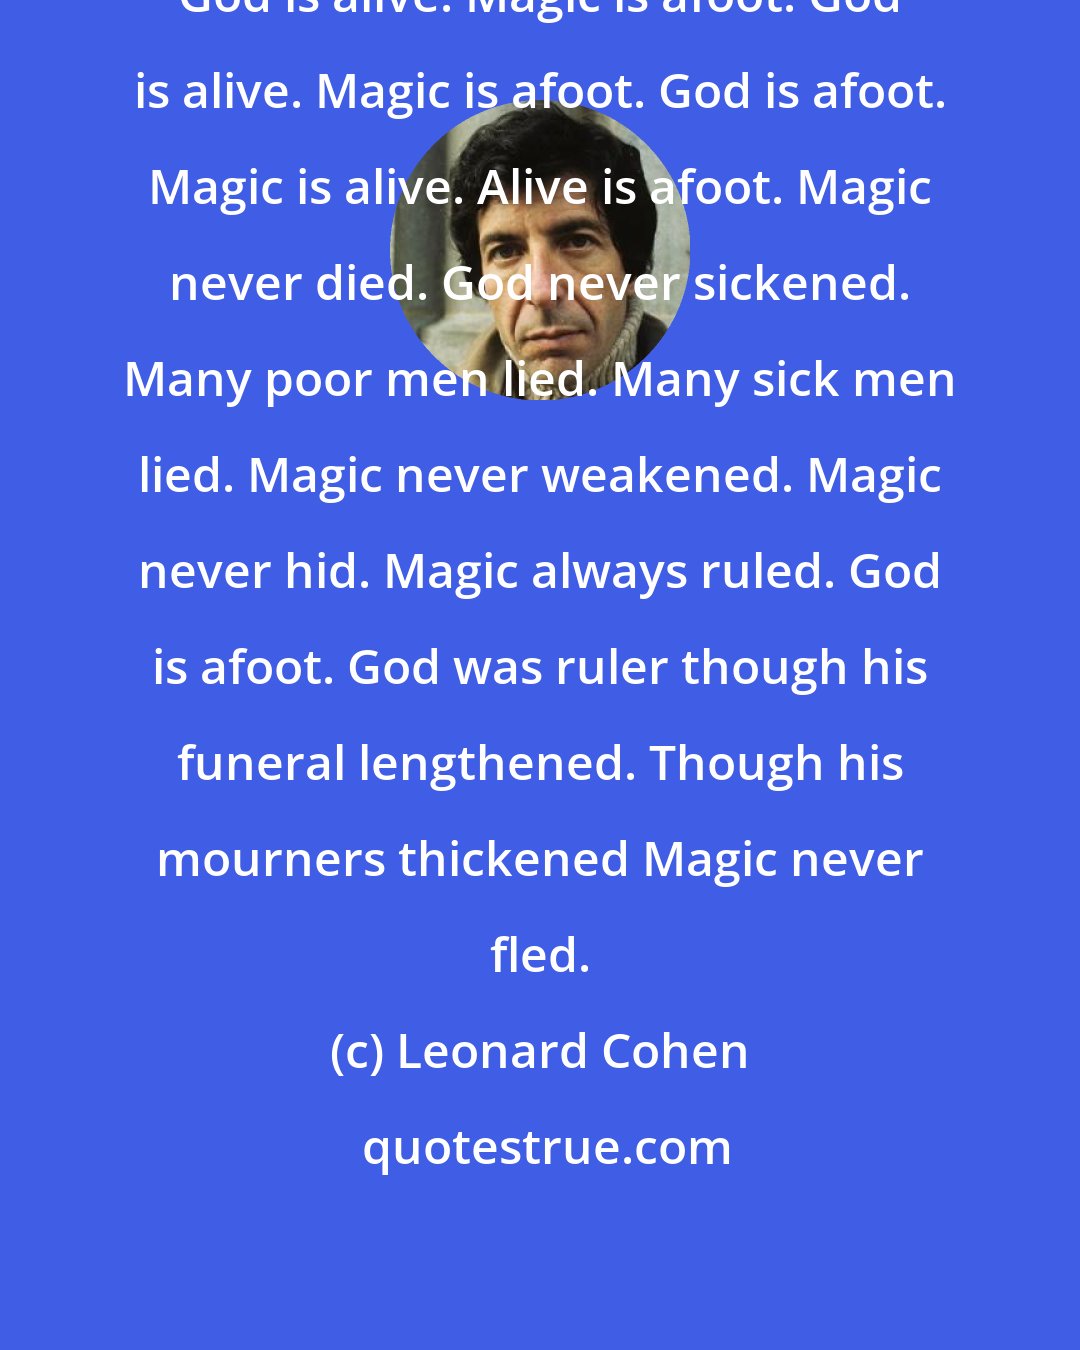 Leonard Cohen: God is alive. Magic is afoot. God is alive. Magic is afoot. God is afoot. Magic is alive. Alive is afoot. Magic never died. God never sickened. Many poor men lied. Many sick men lied. Magic never weakened. Magic never hid. Magic always ruled. God is afoot. God was ruler though his funeral lengthened. Though his mourners thickened Magic never fled.